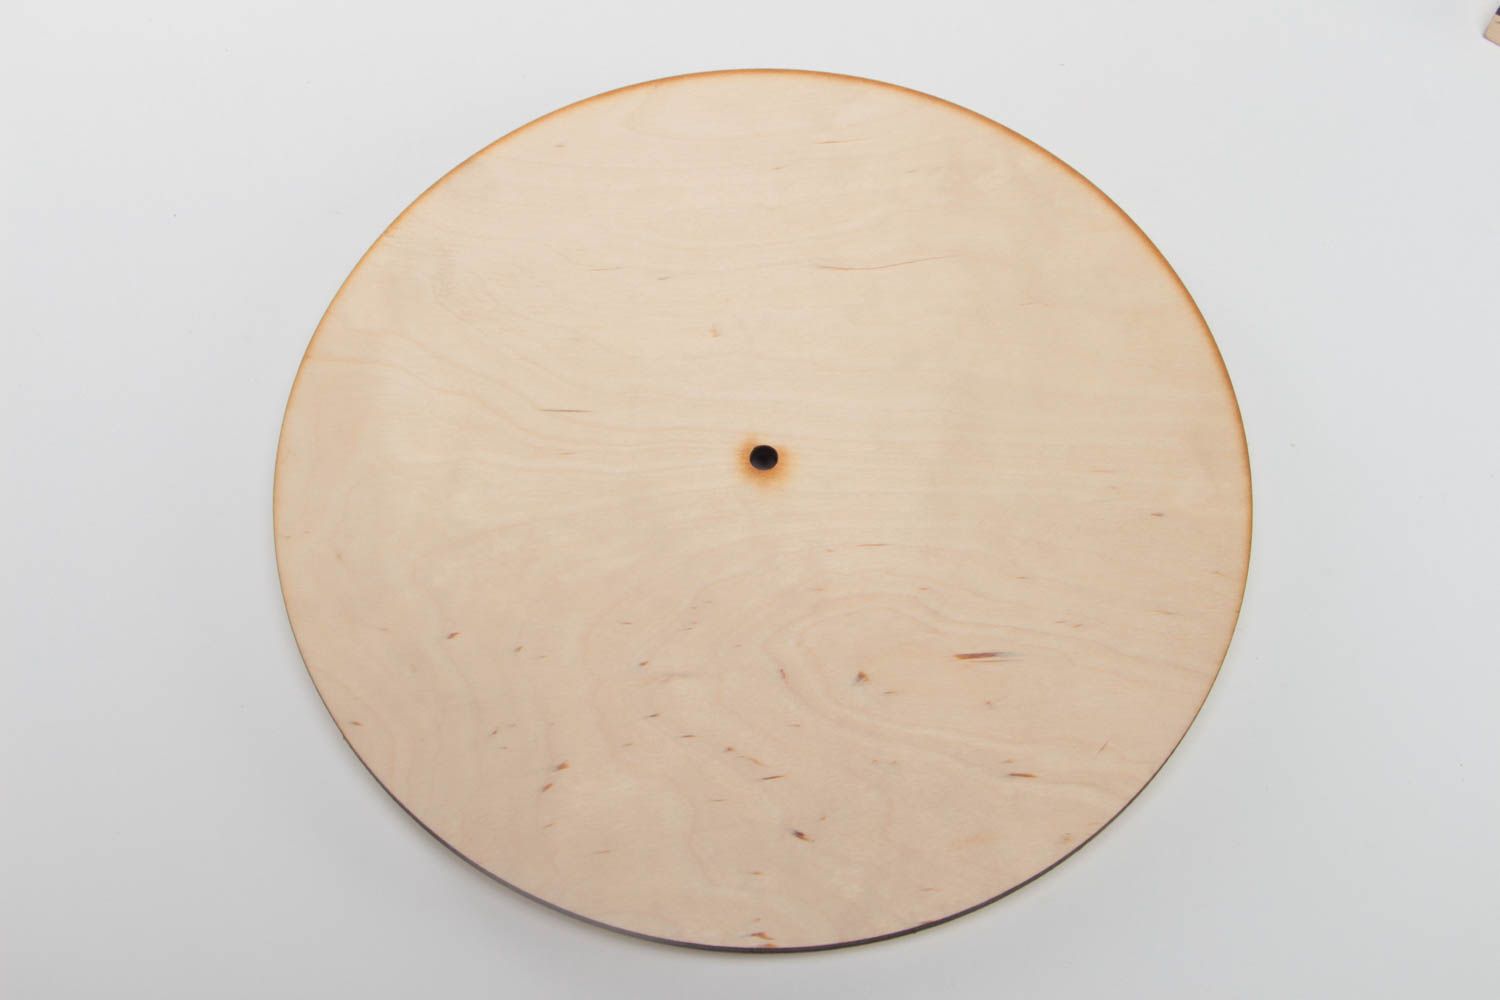 Handmade large round plywood craft blank for decoupage wall clock art supplies photo 2